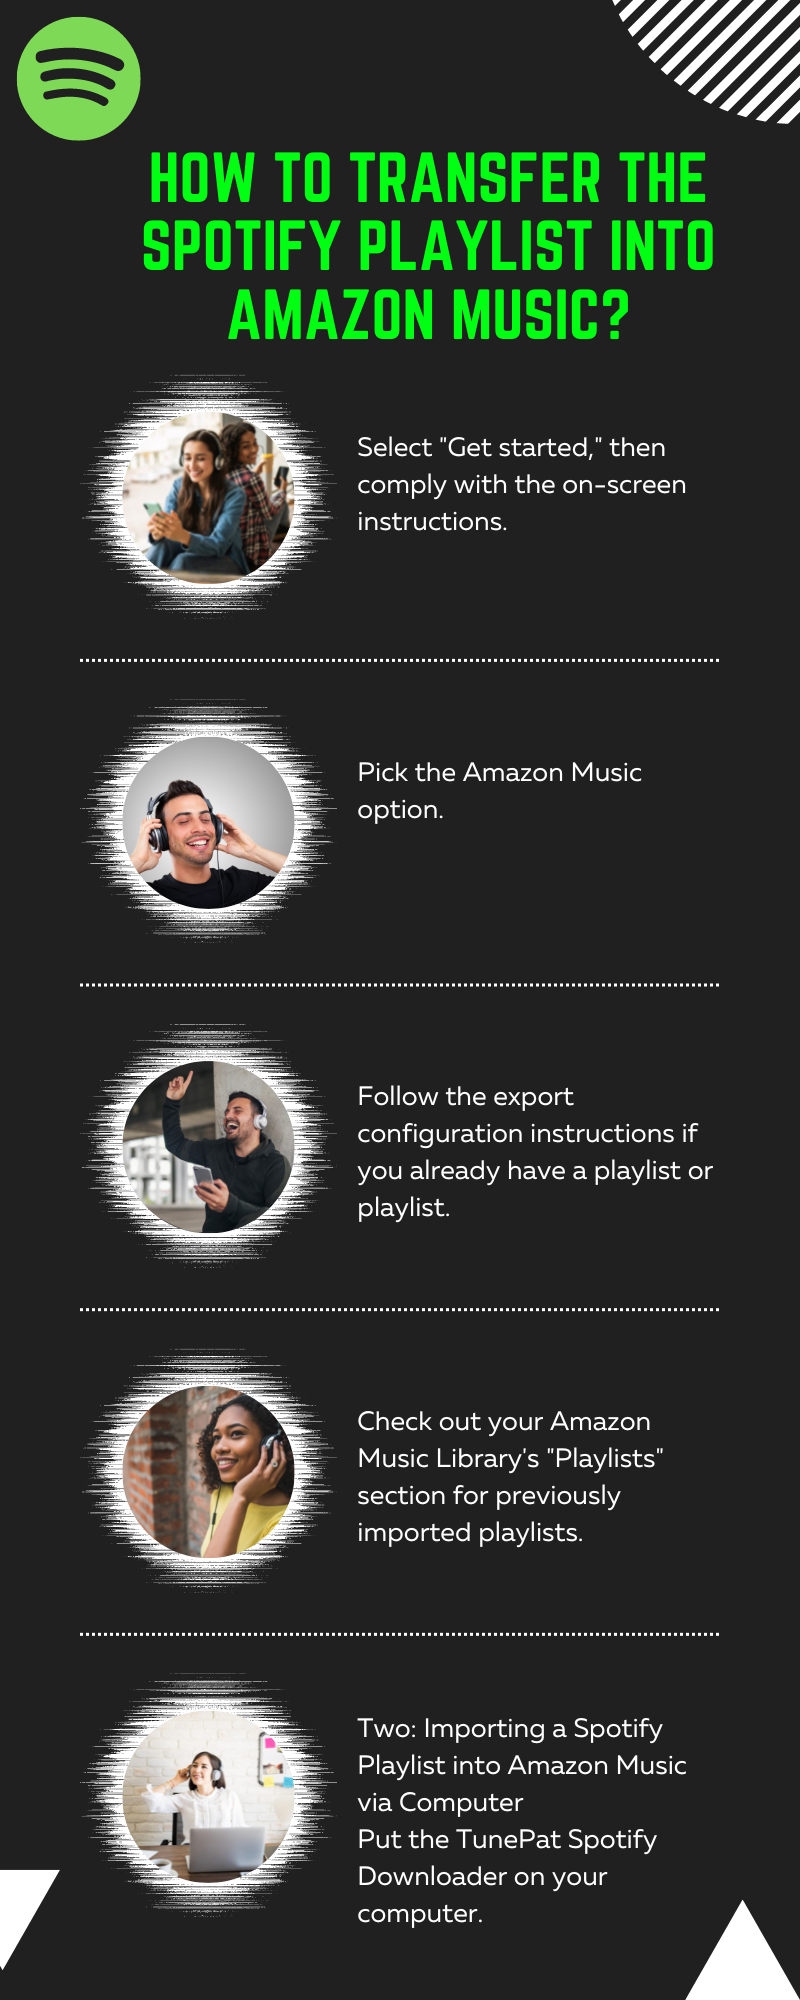 Change your Spotify Playlist to Amazon Music